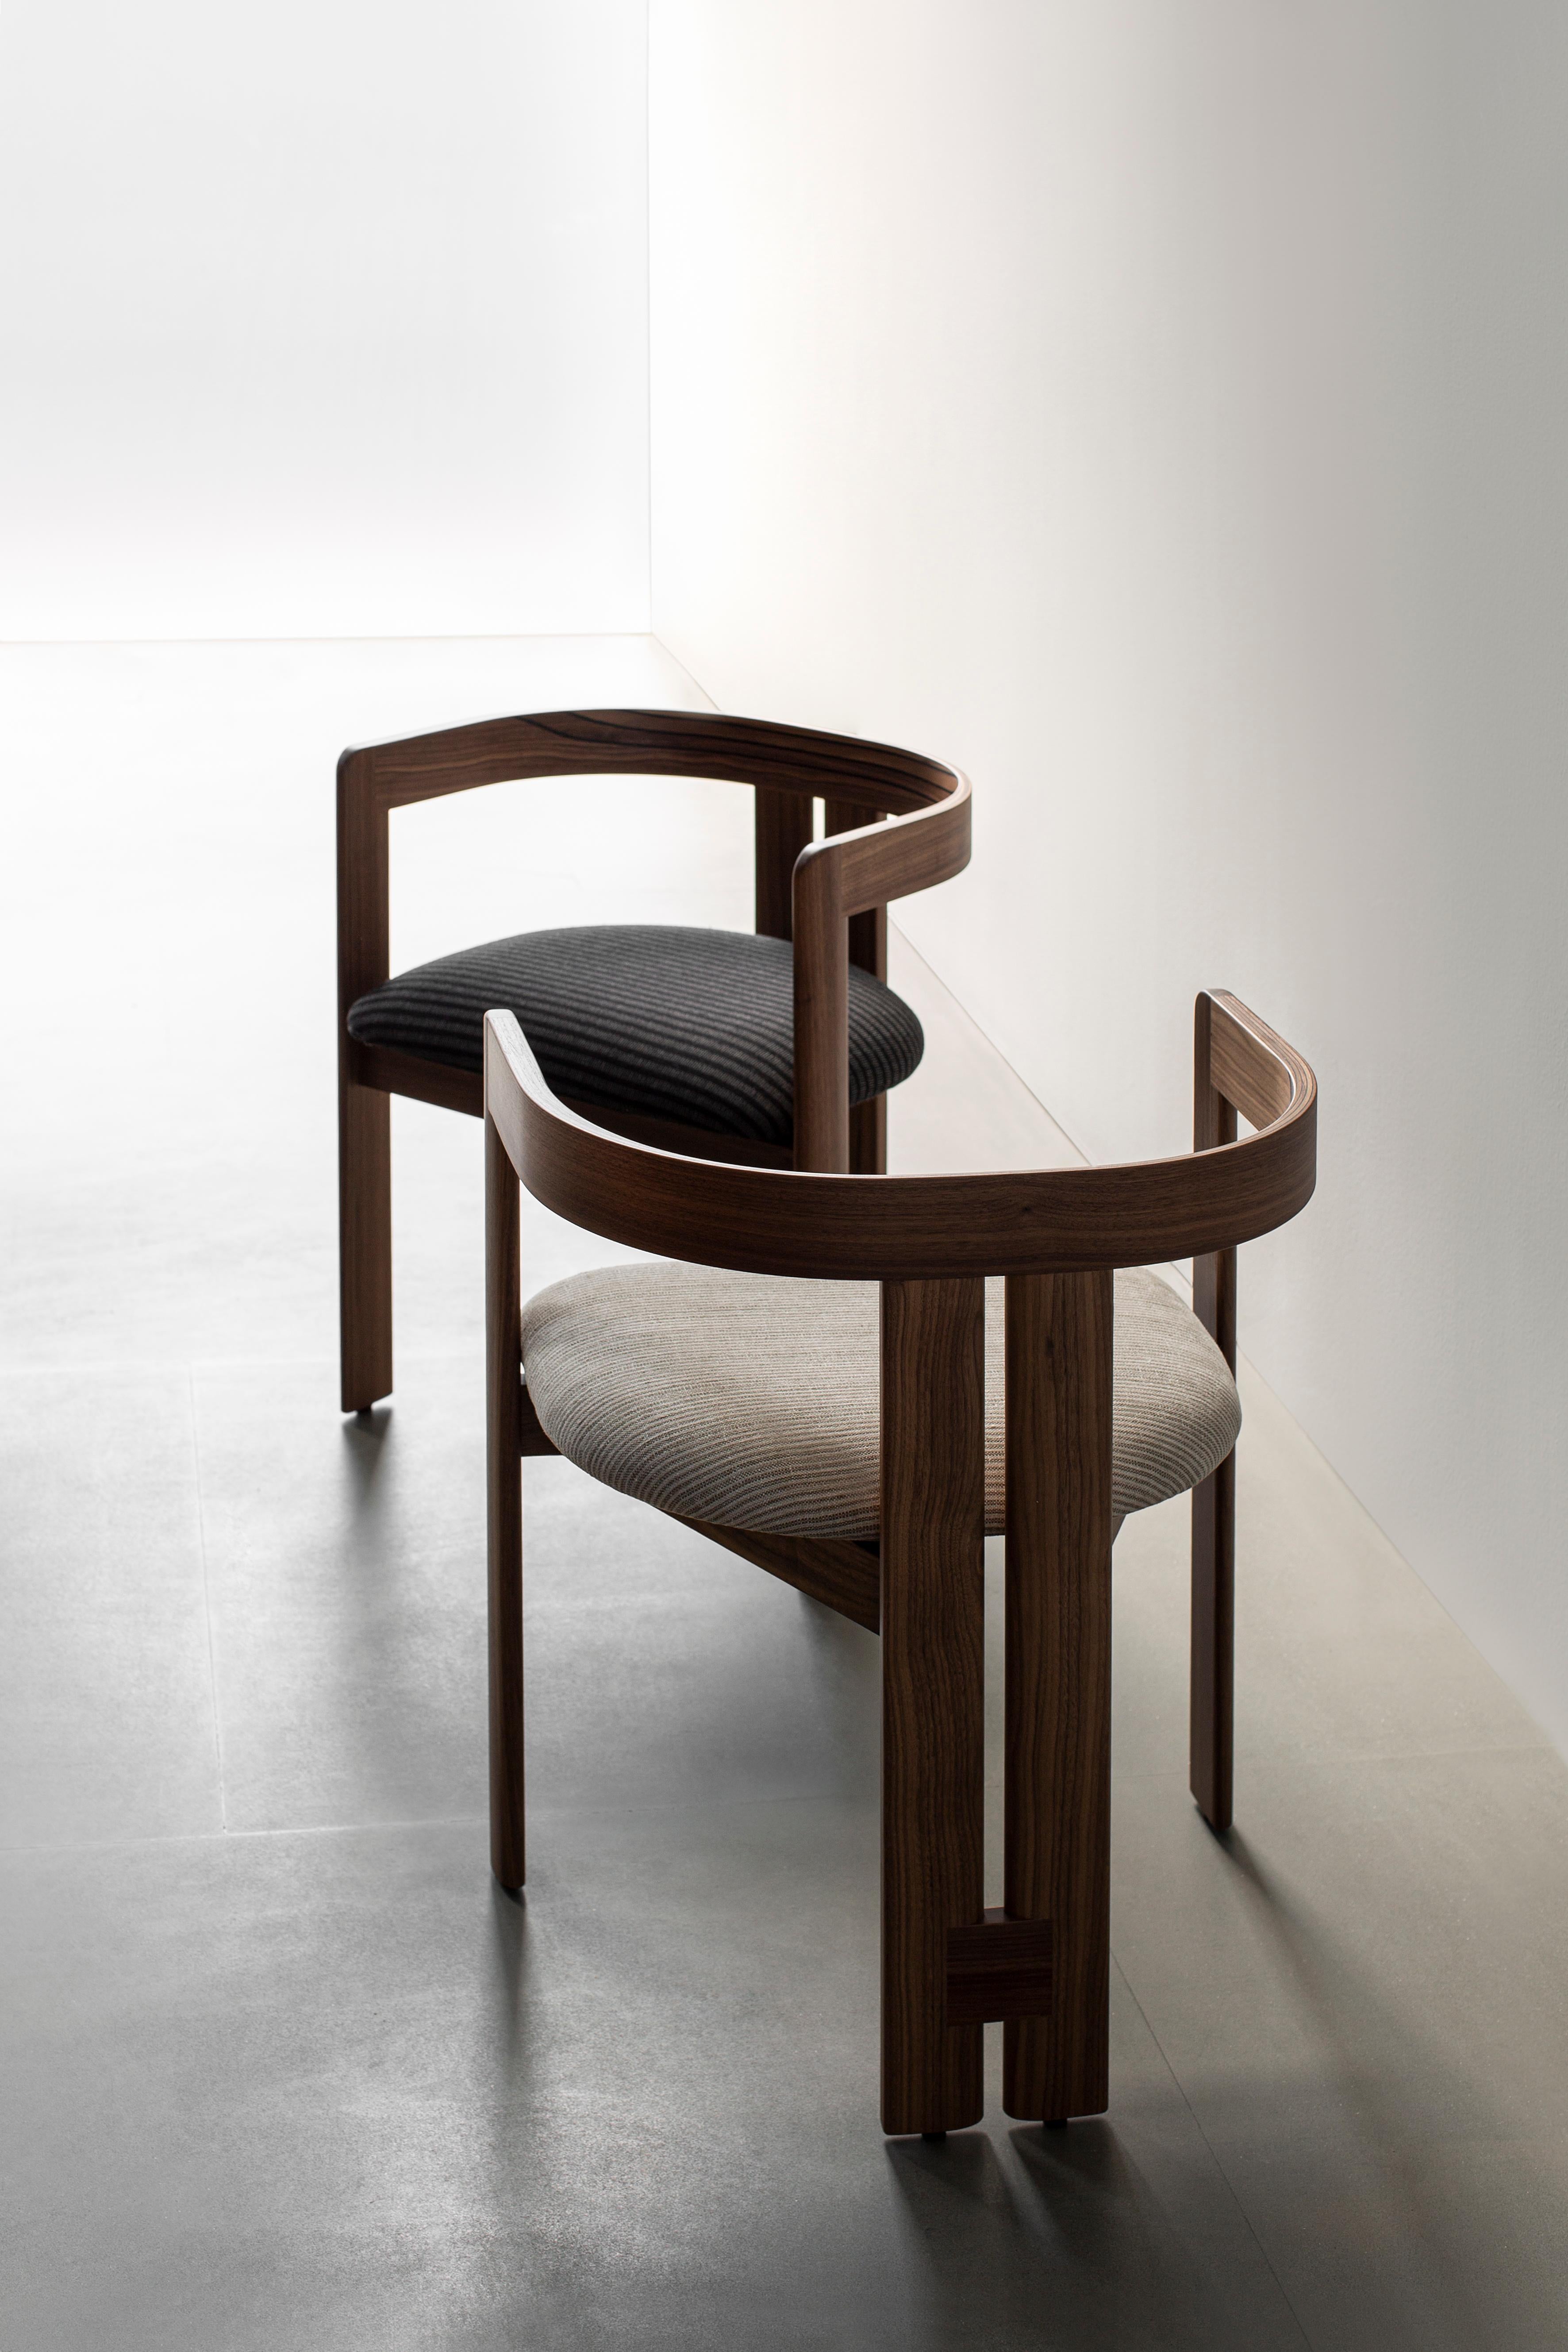 Tacchini Pigreco Chair Limited Edition in Lippia 07 Upholstery with Walnut Frame 1